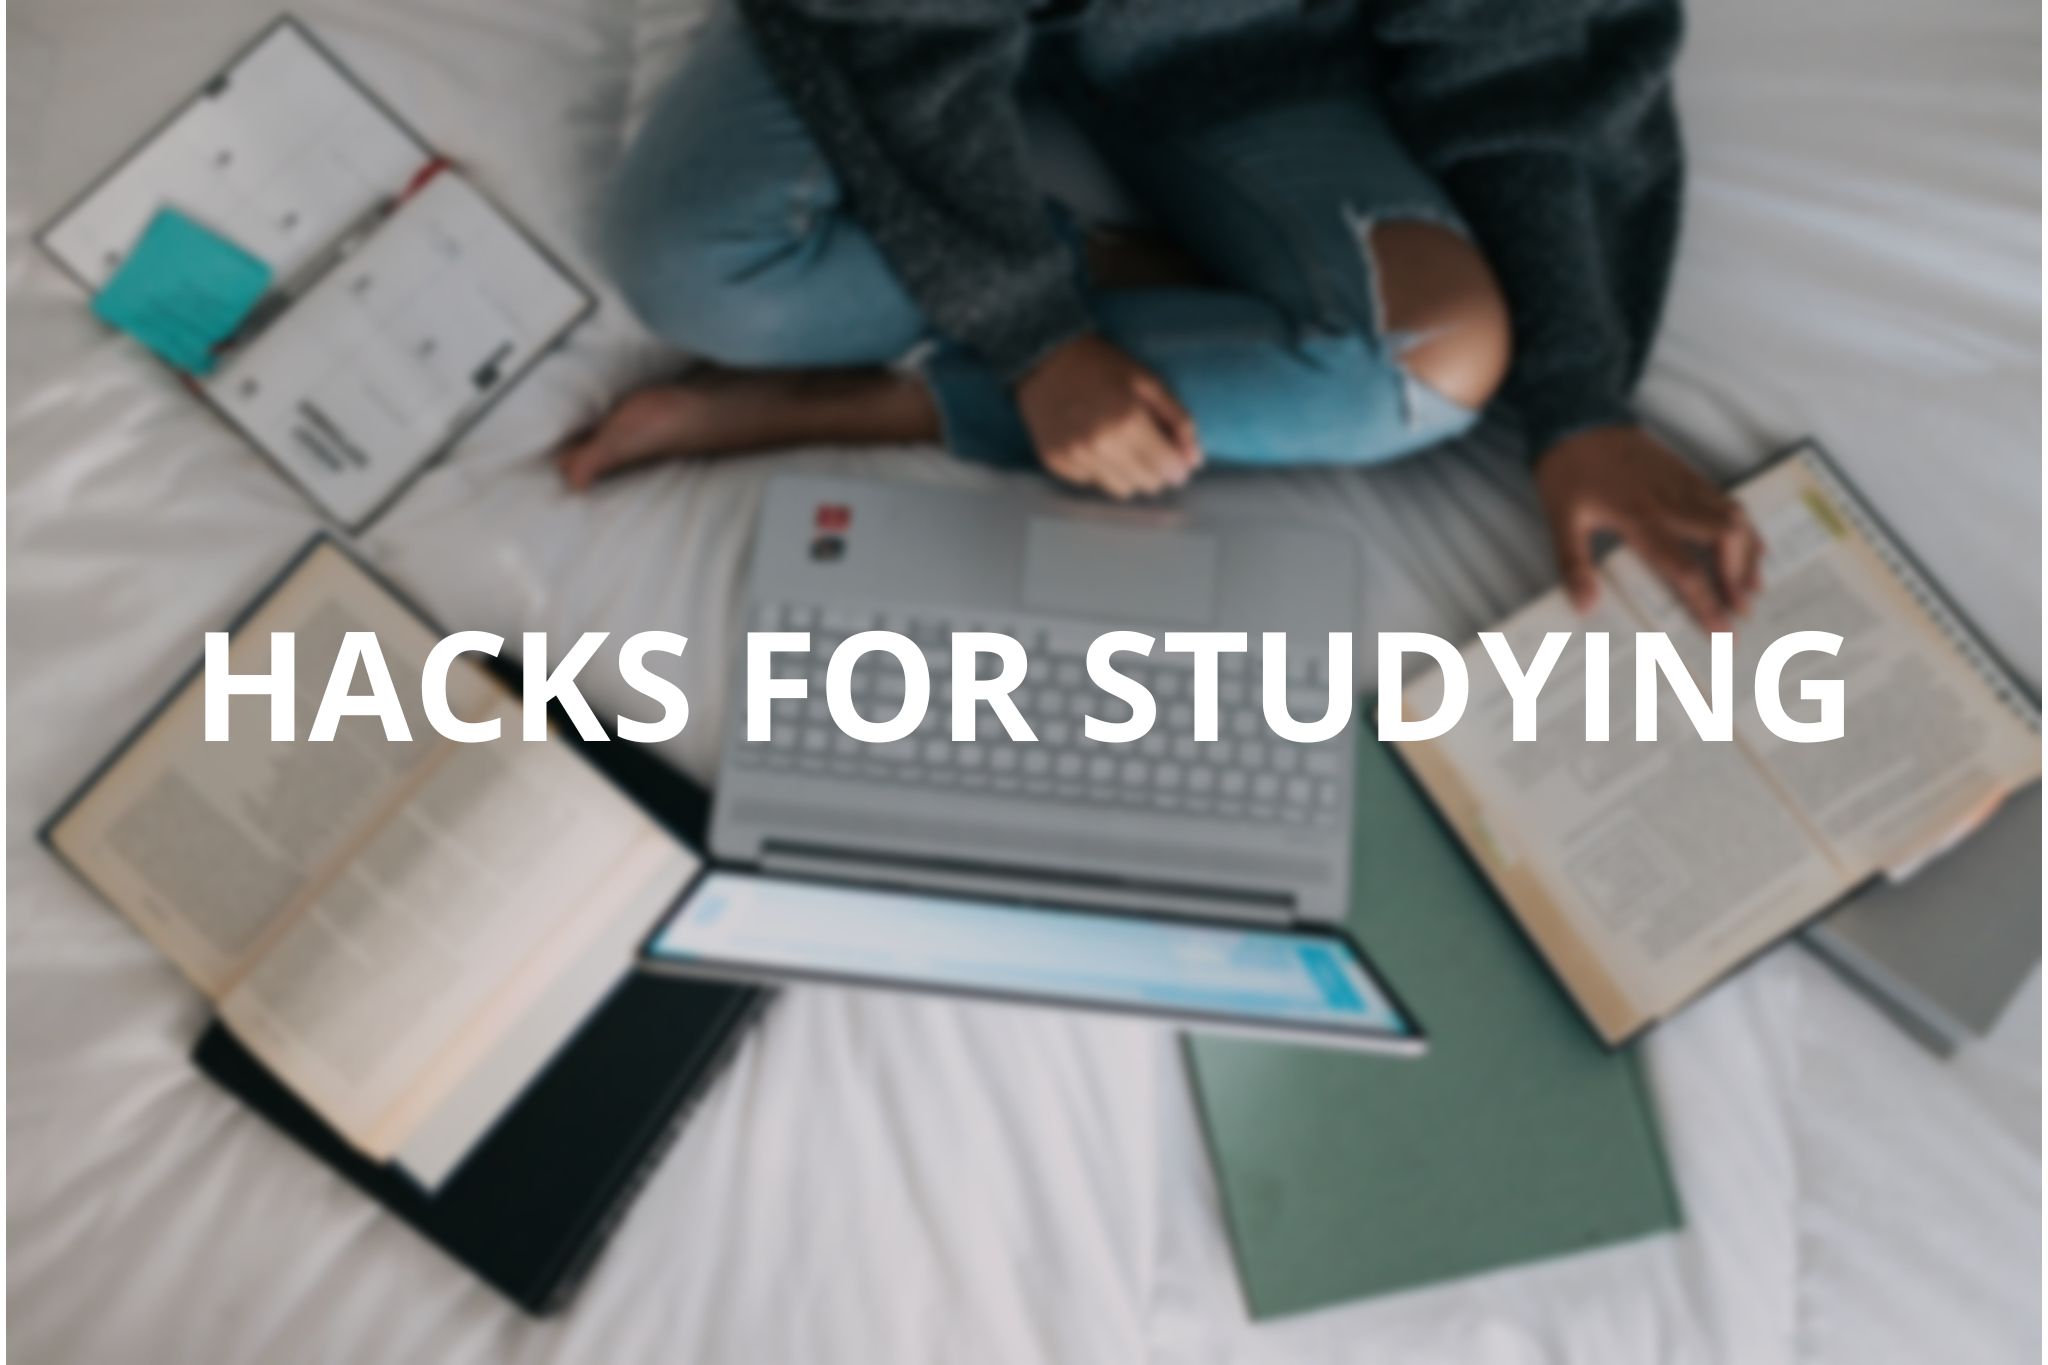 Hacks for studying